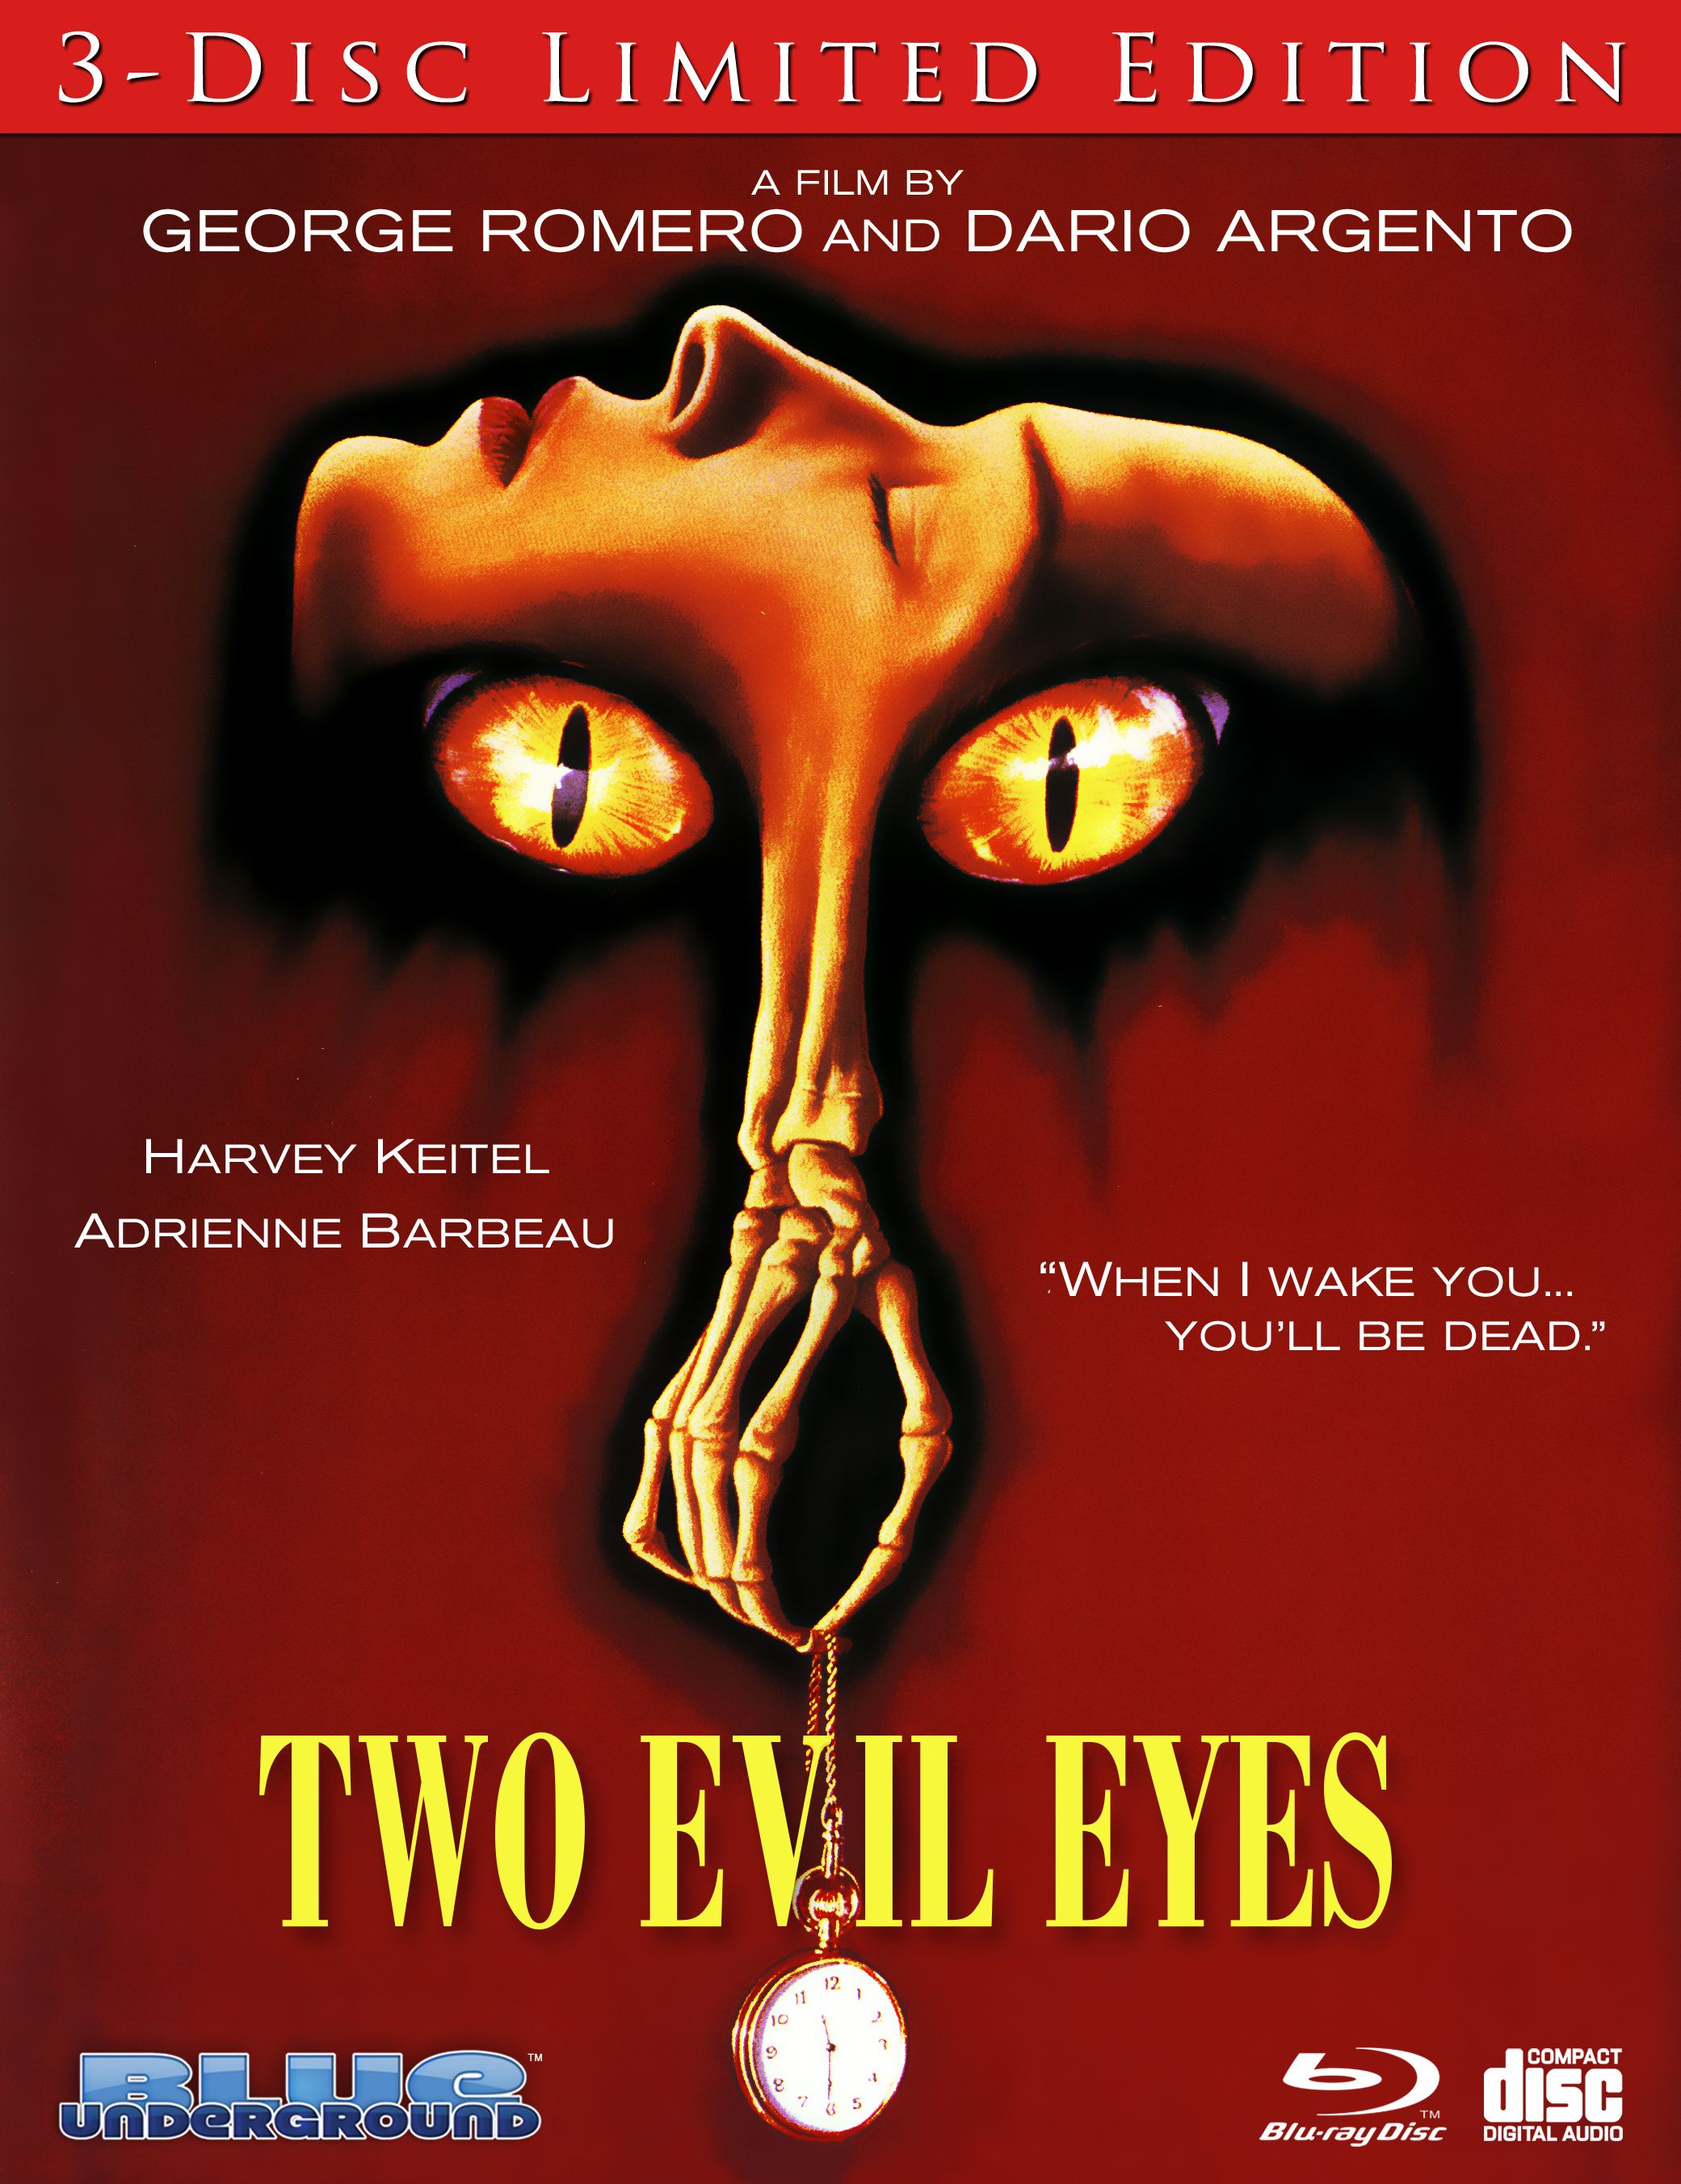 Two Evil Eyes 3-Disc Limited Edition Blu-ray